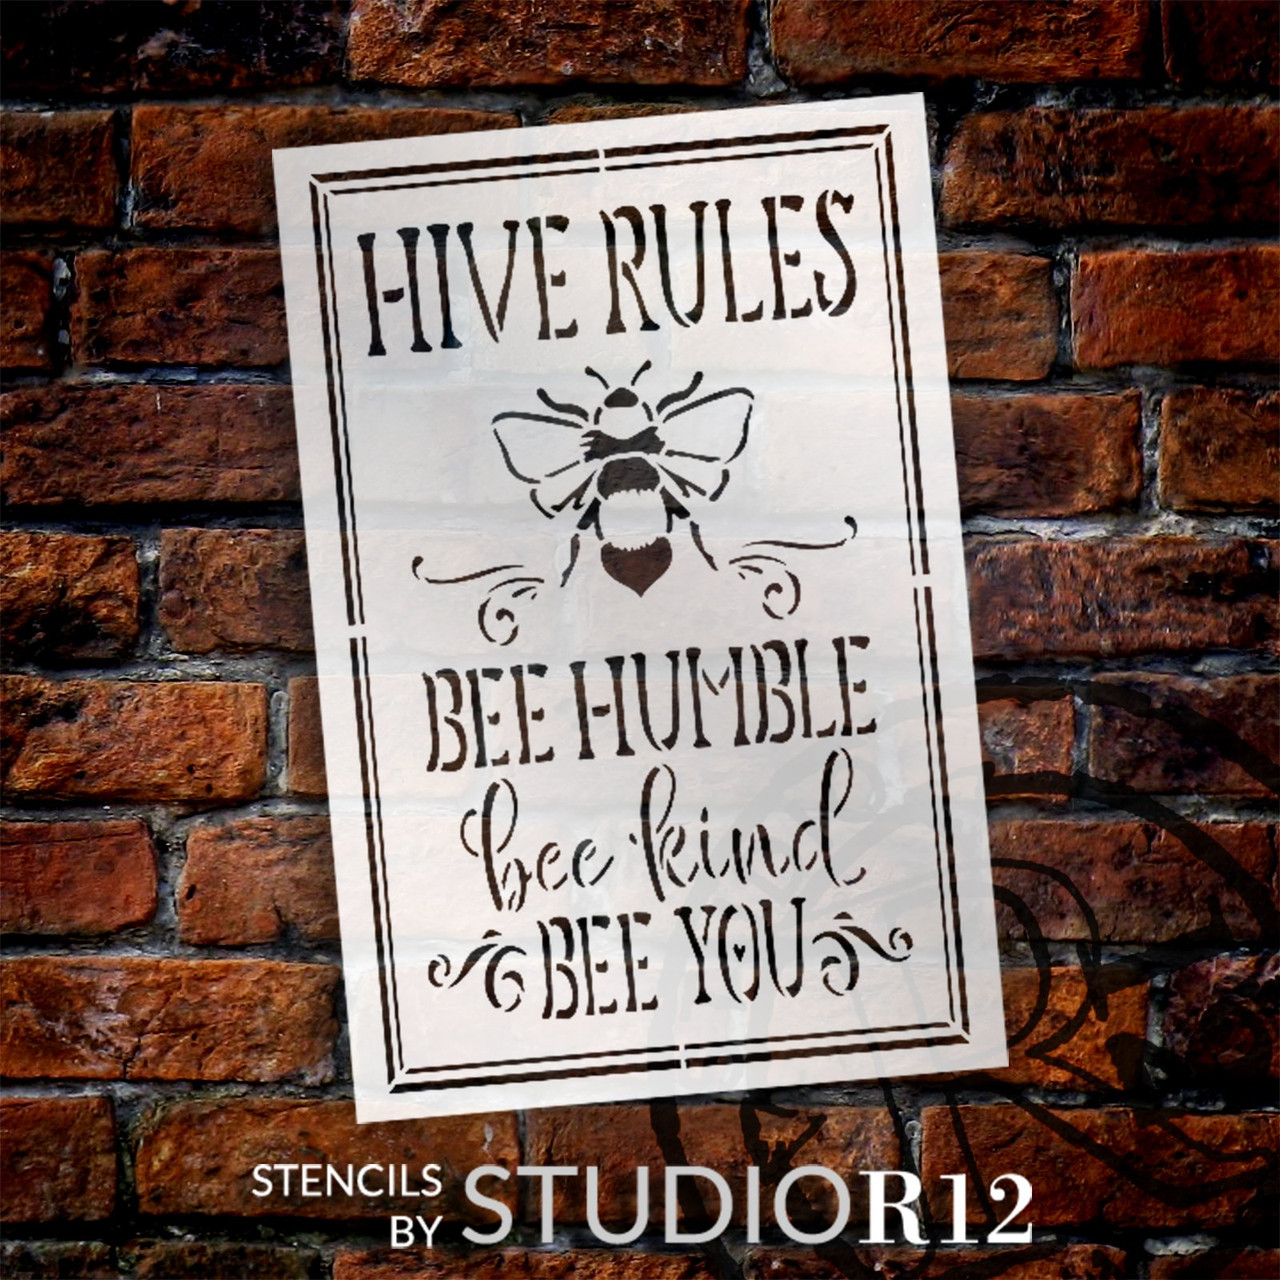 Hive Rules Stencil by StudioR12 | Craft DIY Inspirational Home Decor | Paint Spring Wood Sign | Reusable Mylar Template | Select Size